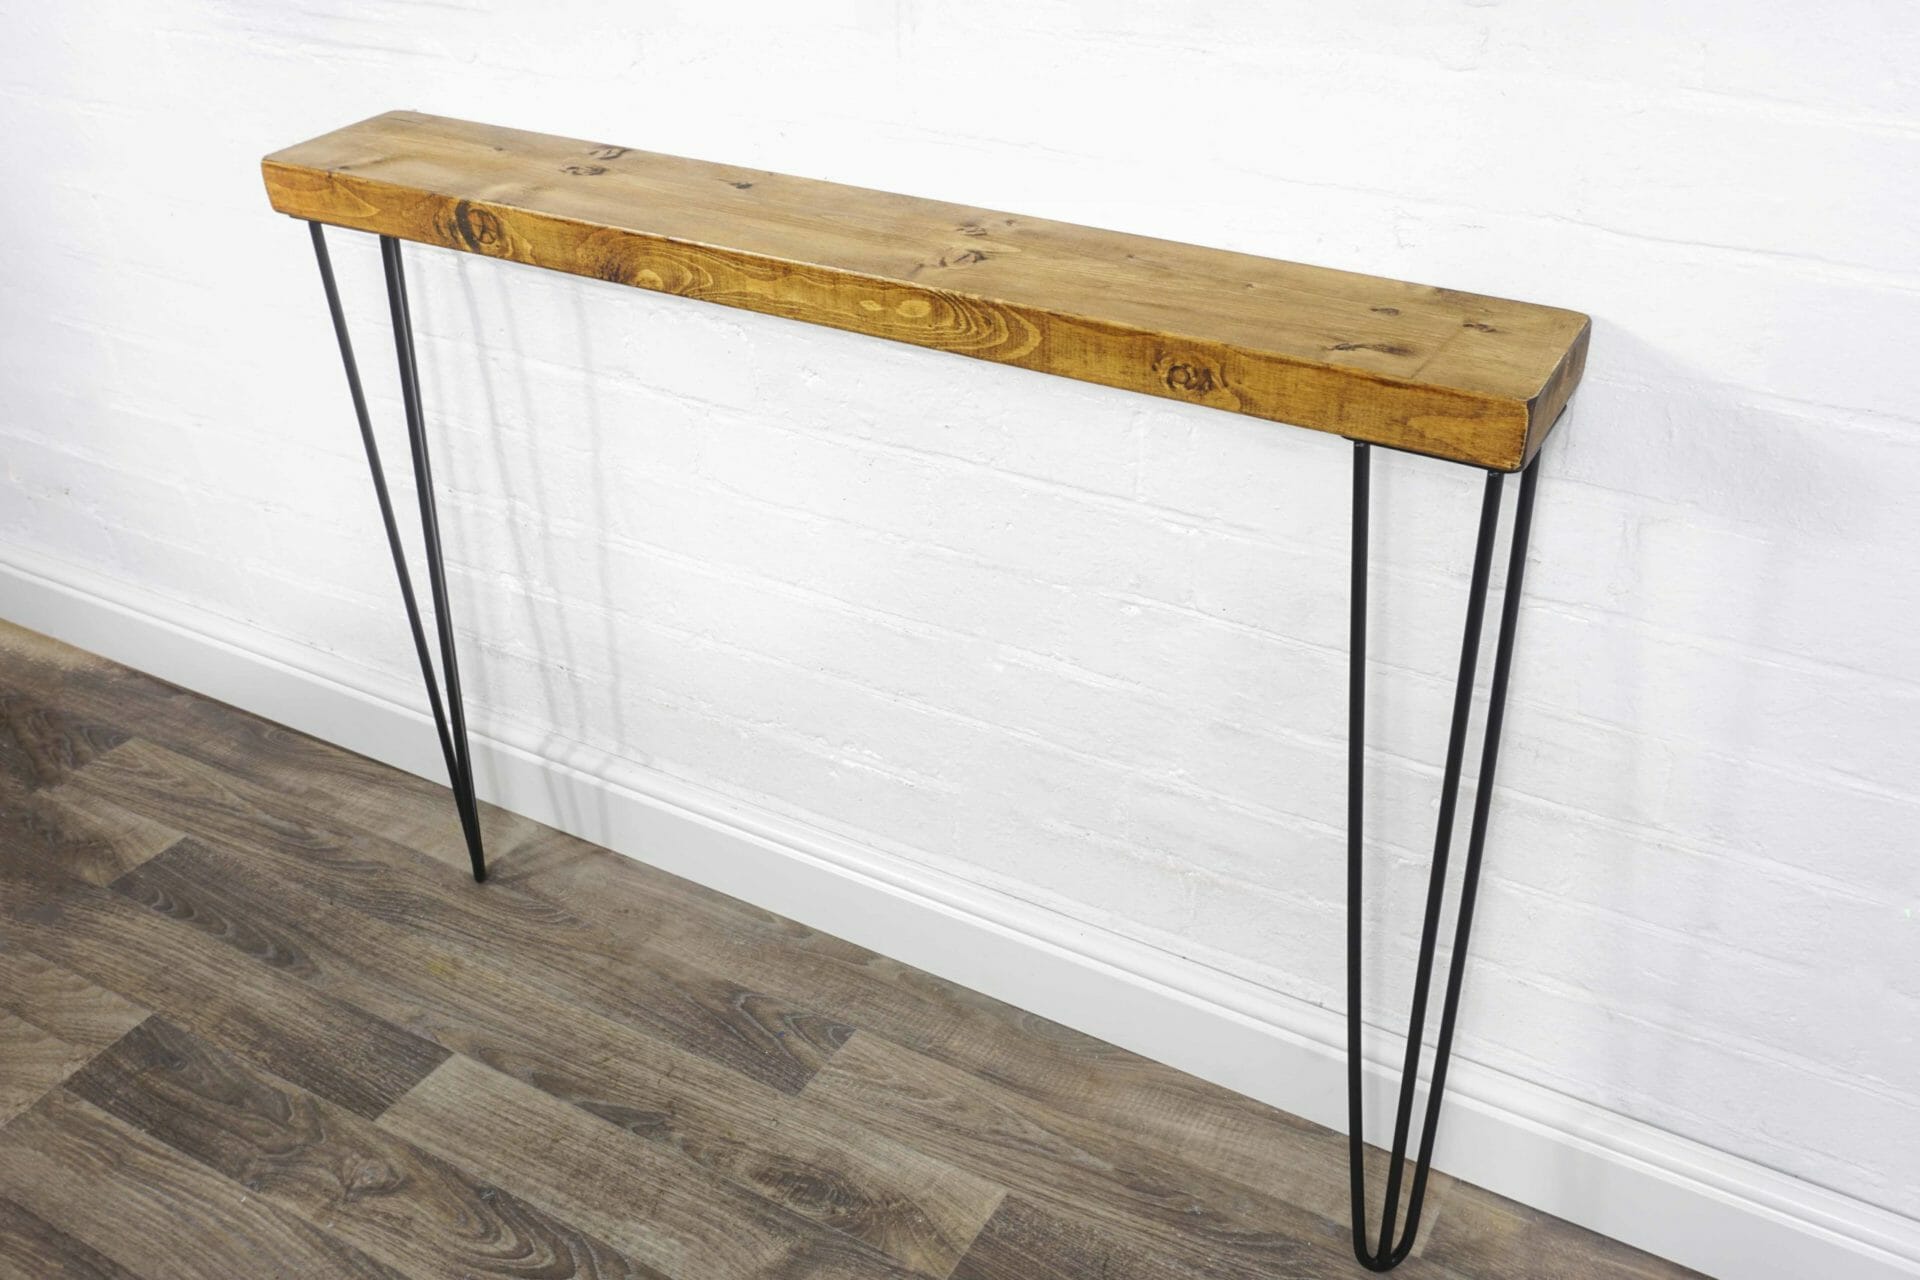 Slimline-Solid-reclaimed-timber-console-table-with-hair-pin-legs-medium-oak